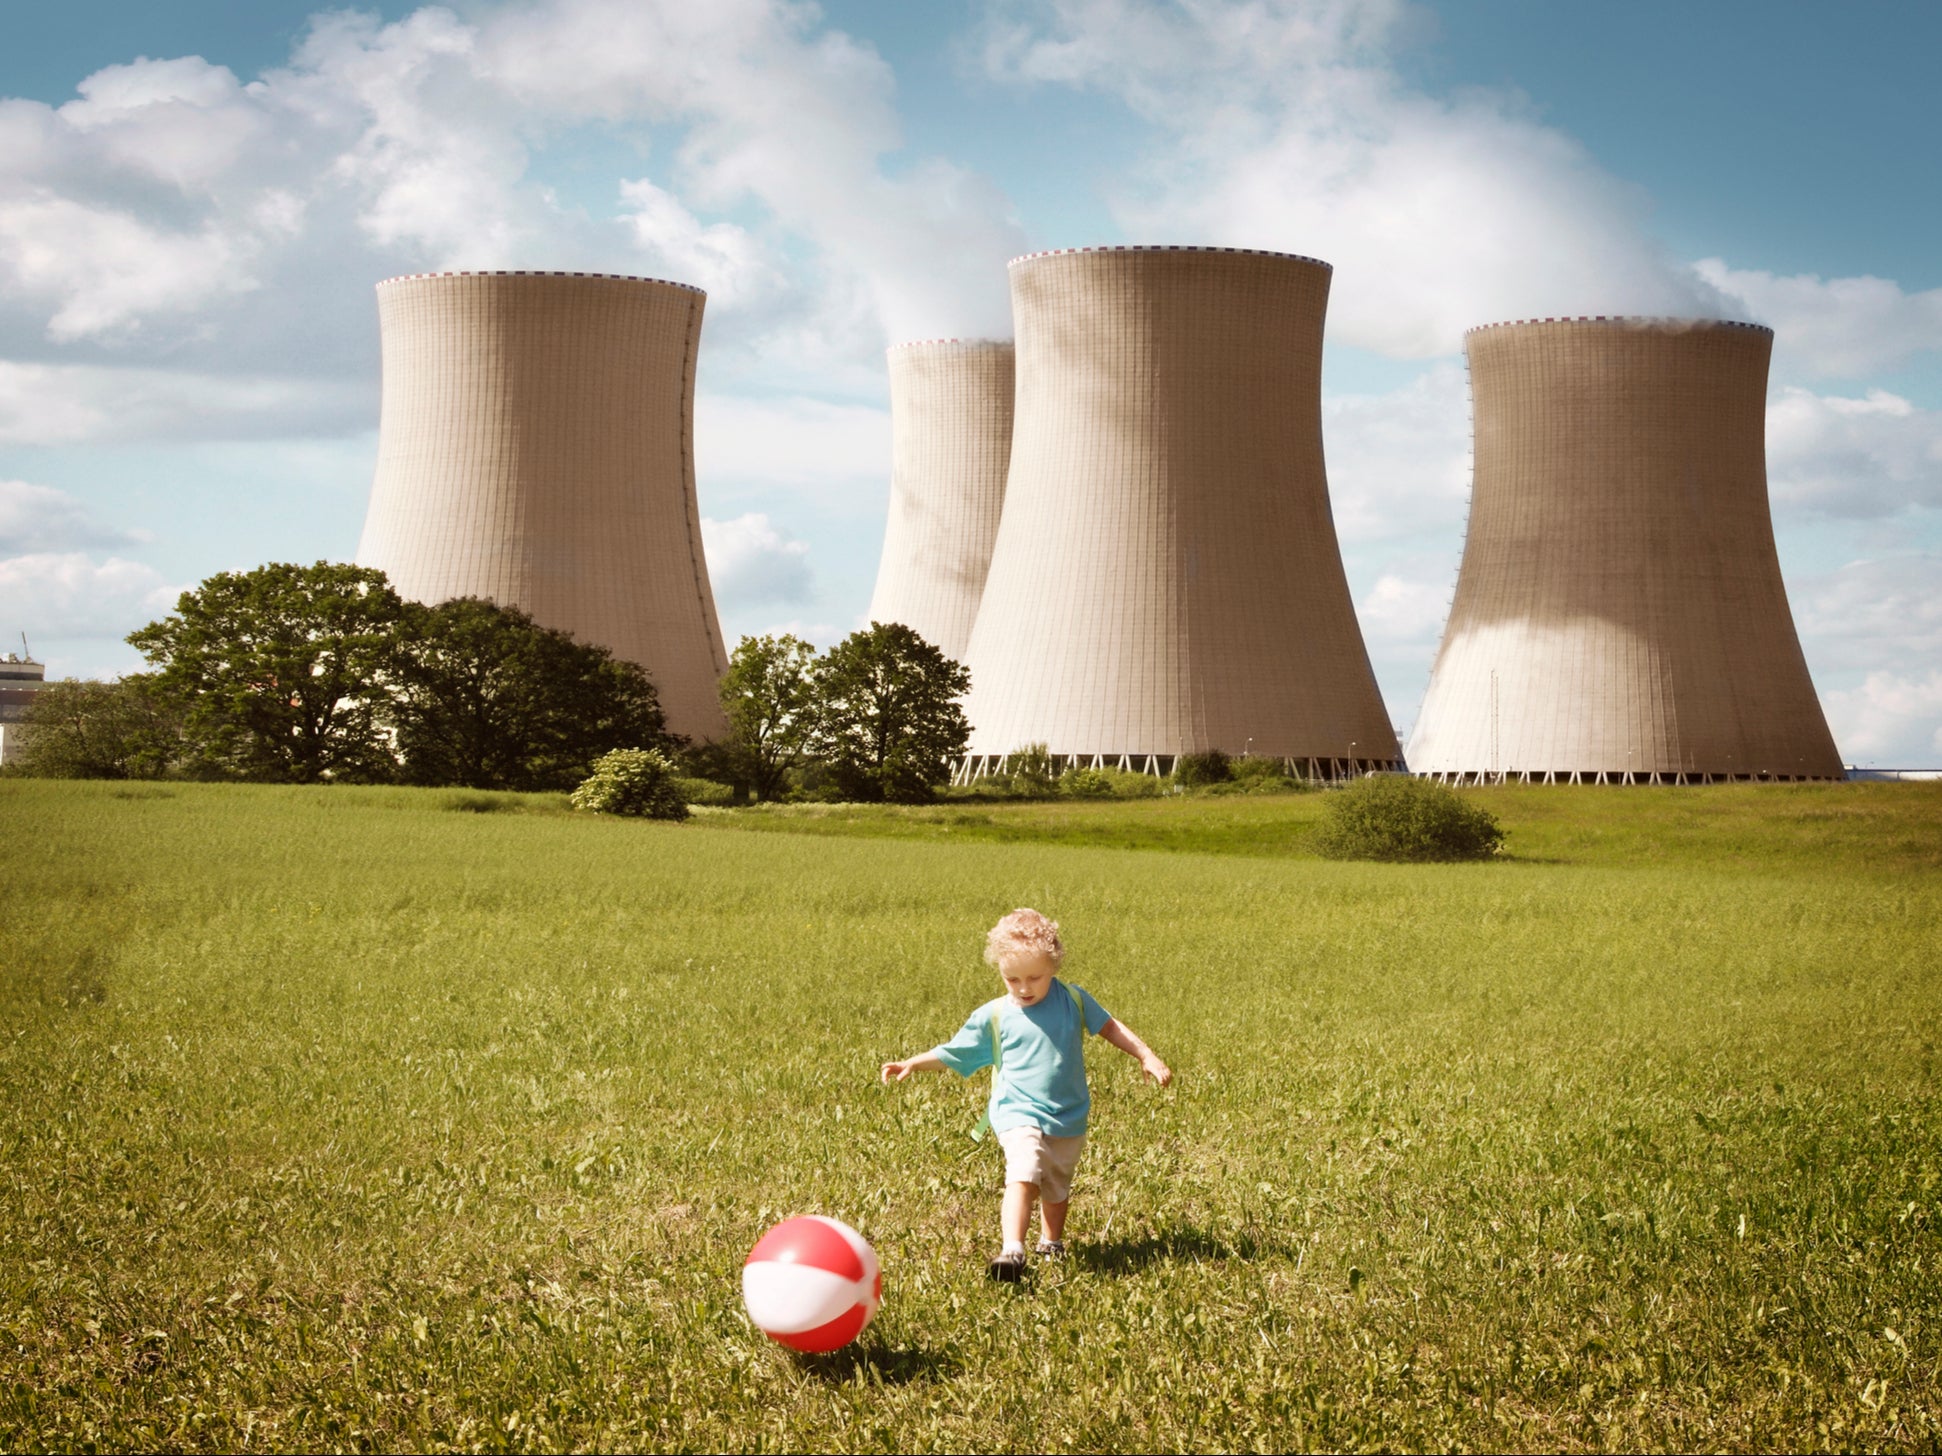 A child plays in front of cooling towers. Scientists have said fossil fuels are having a “major” negative impact on human reproductivity